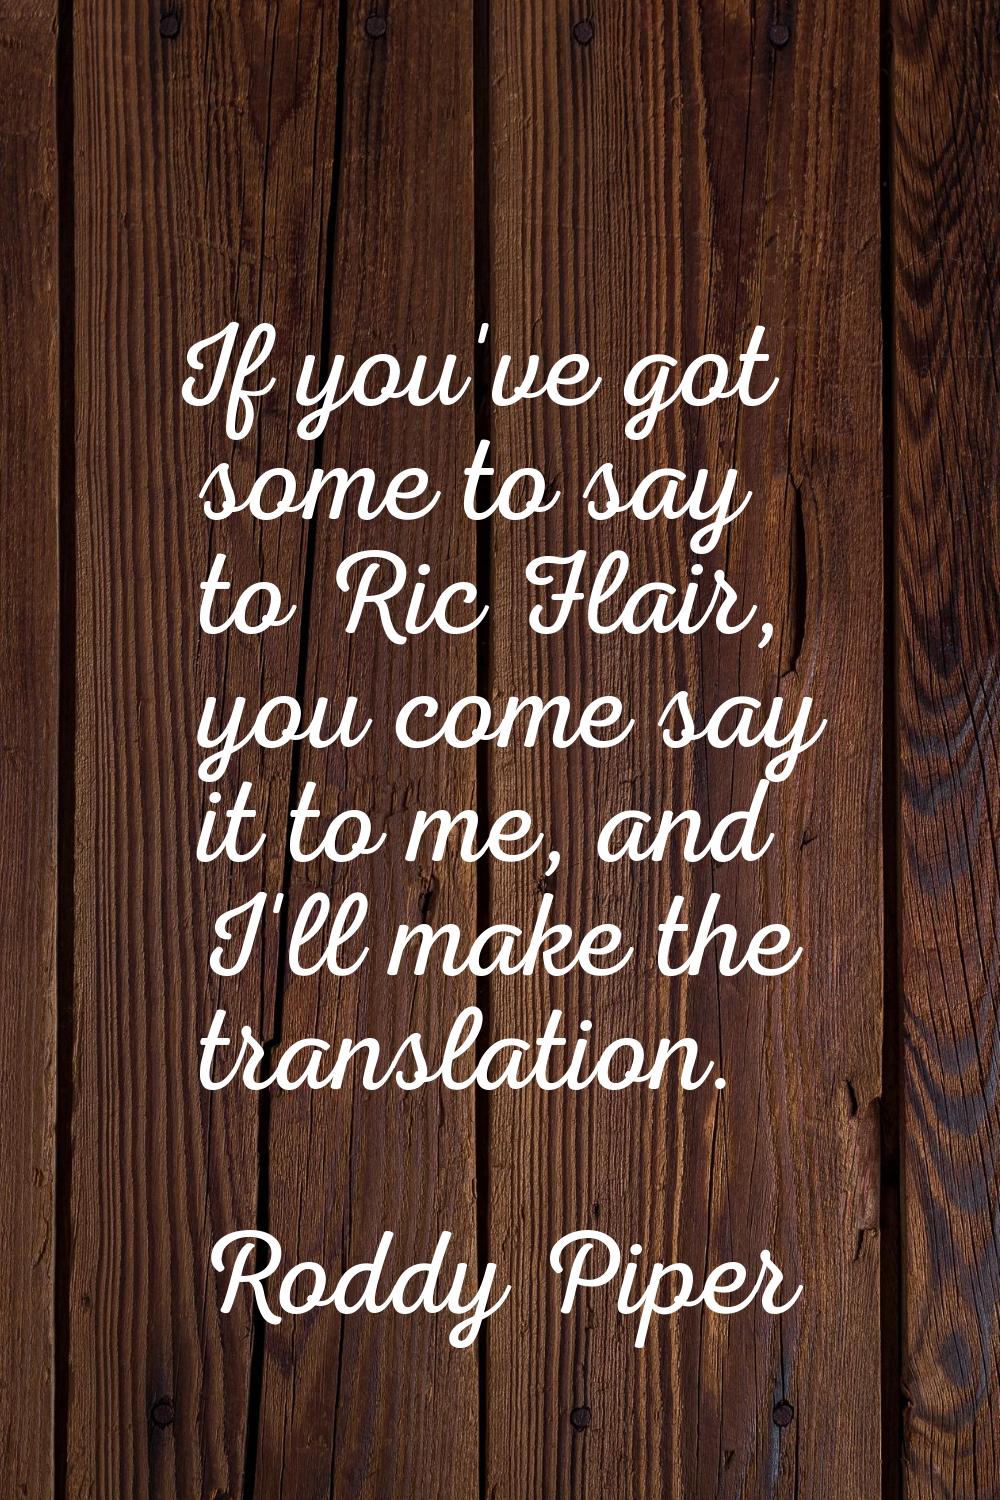 If you've got some to say to Ric Flair, you come say it to me, and I'll make the translation.